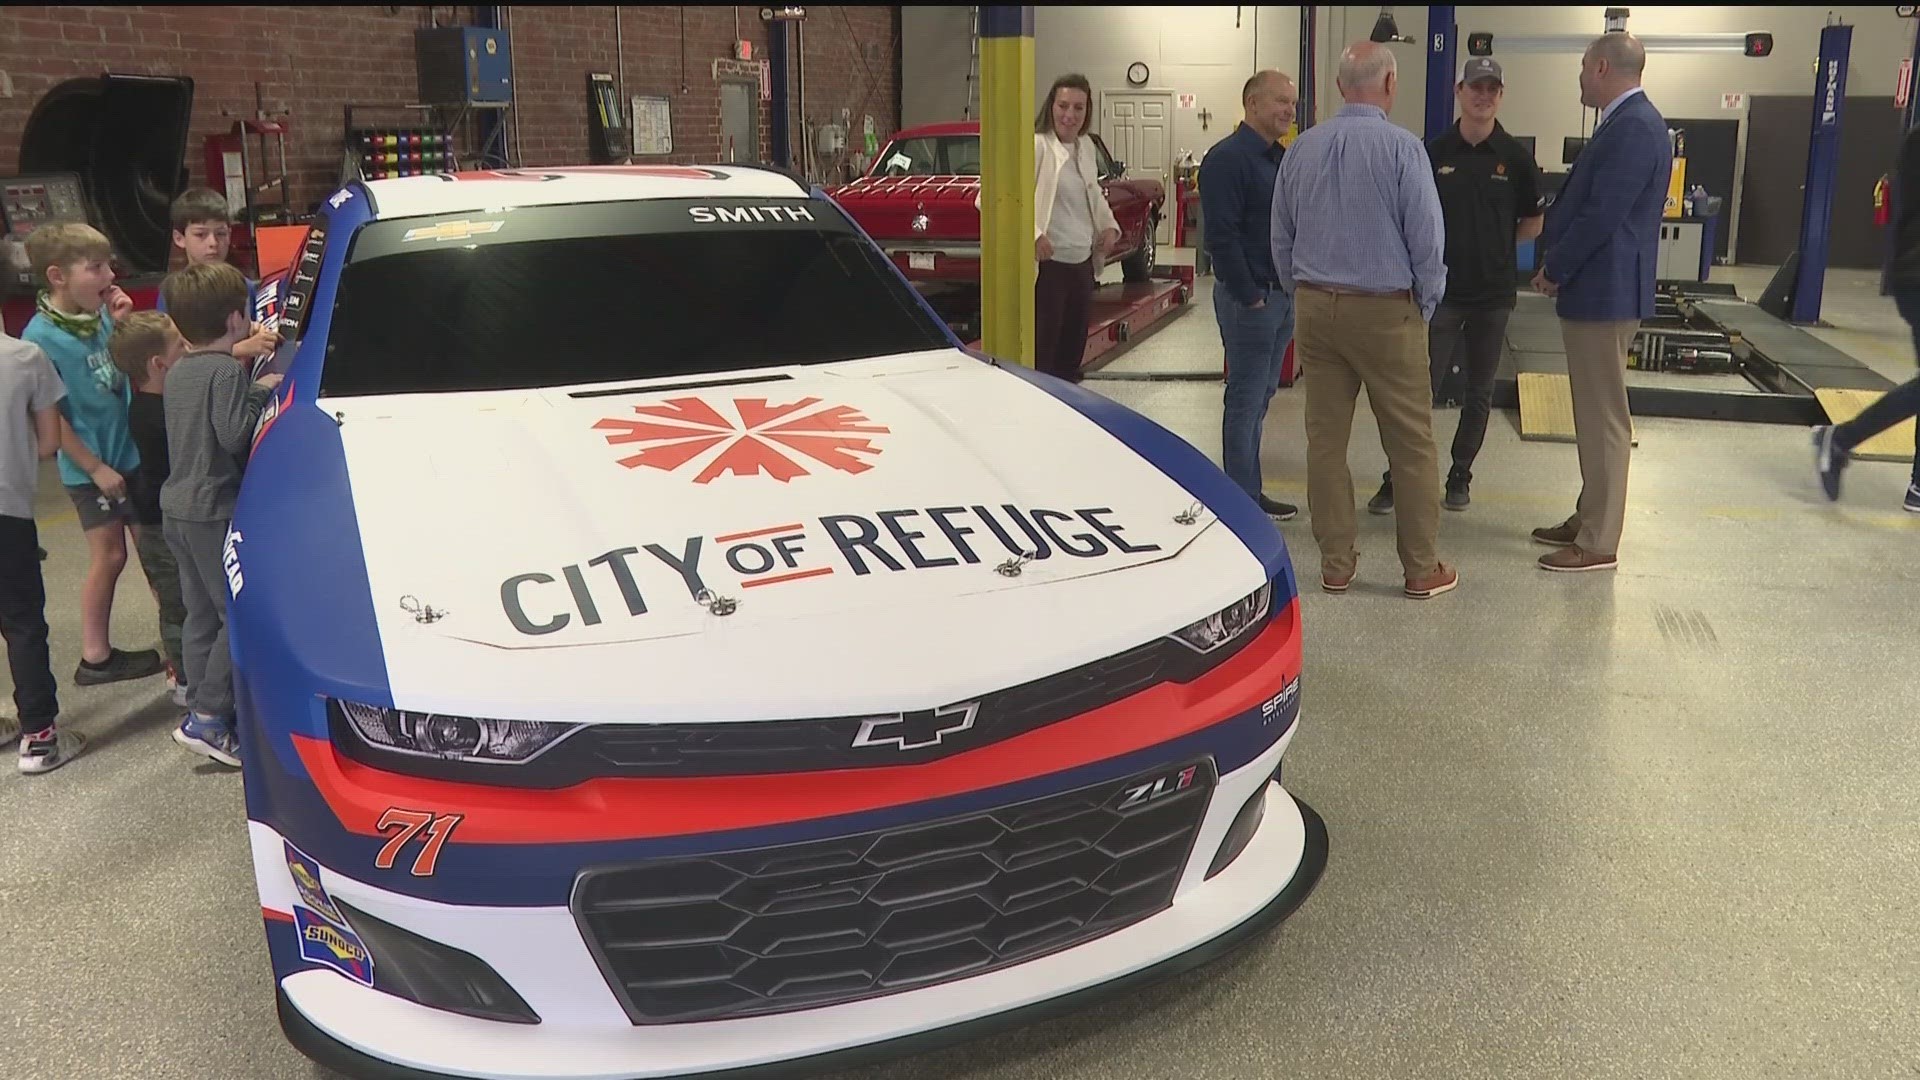 Smith is promoting City of Refuge on his car at the upcoming race.